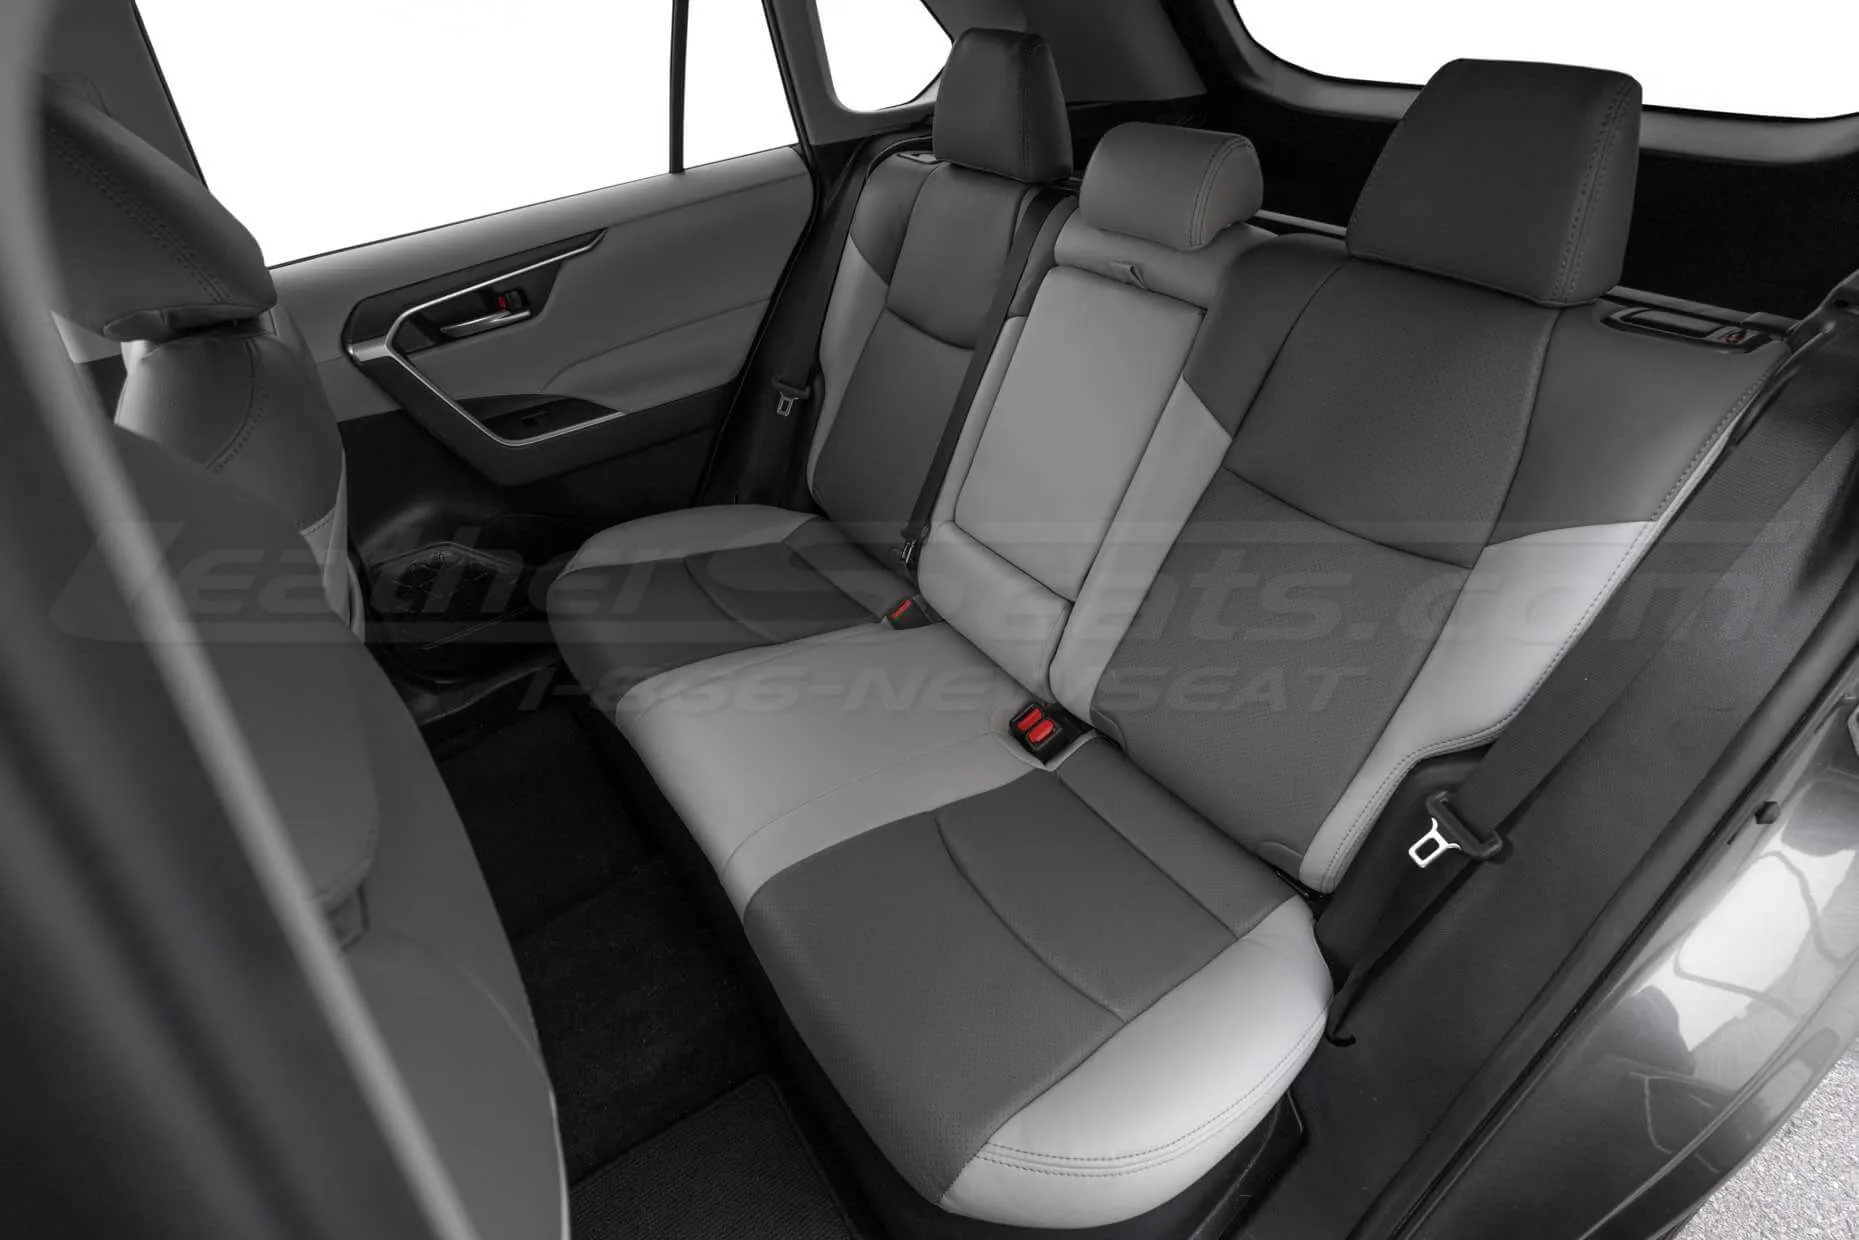 Rear leather Toyota RAV4 seats in Dove Grey with Light Grey Combo